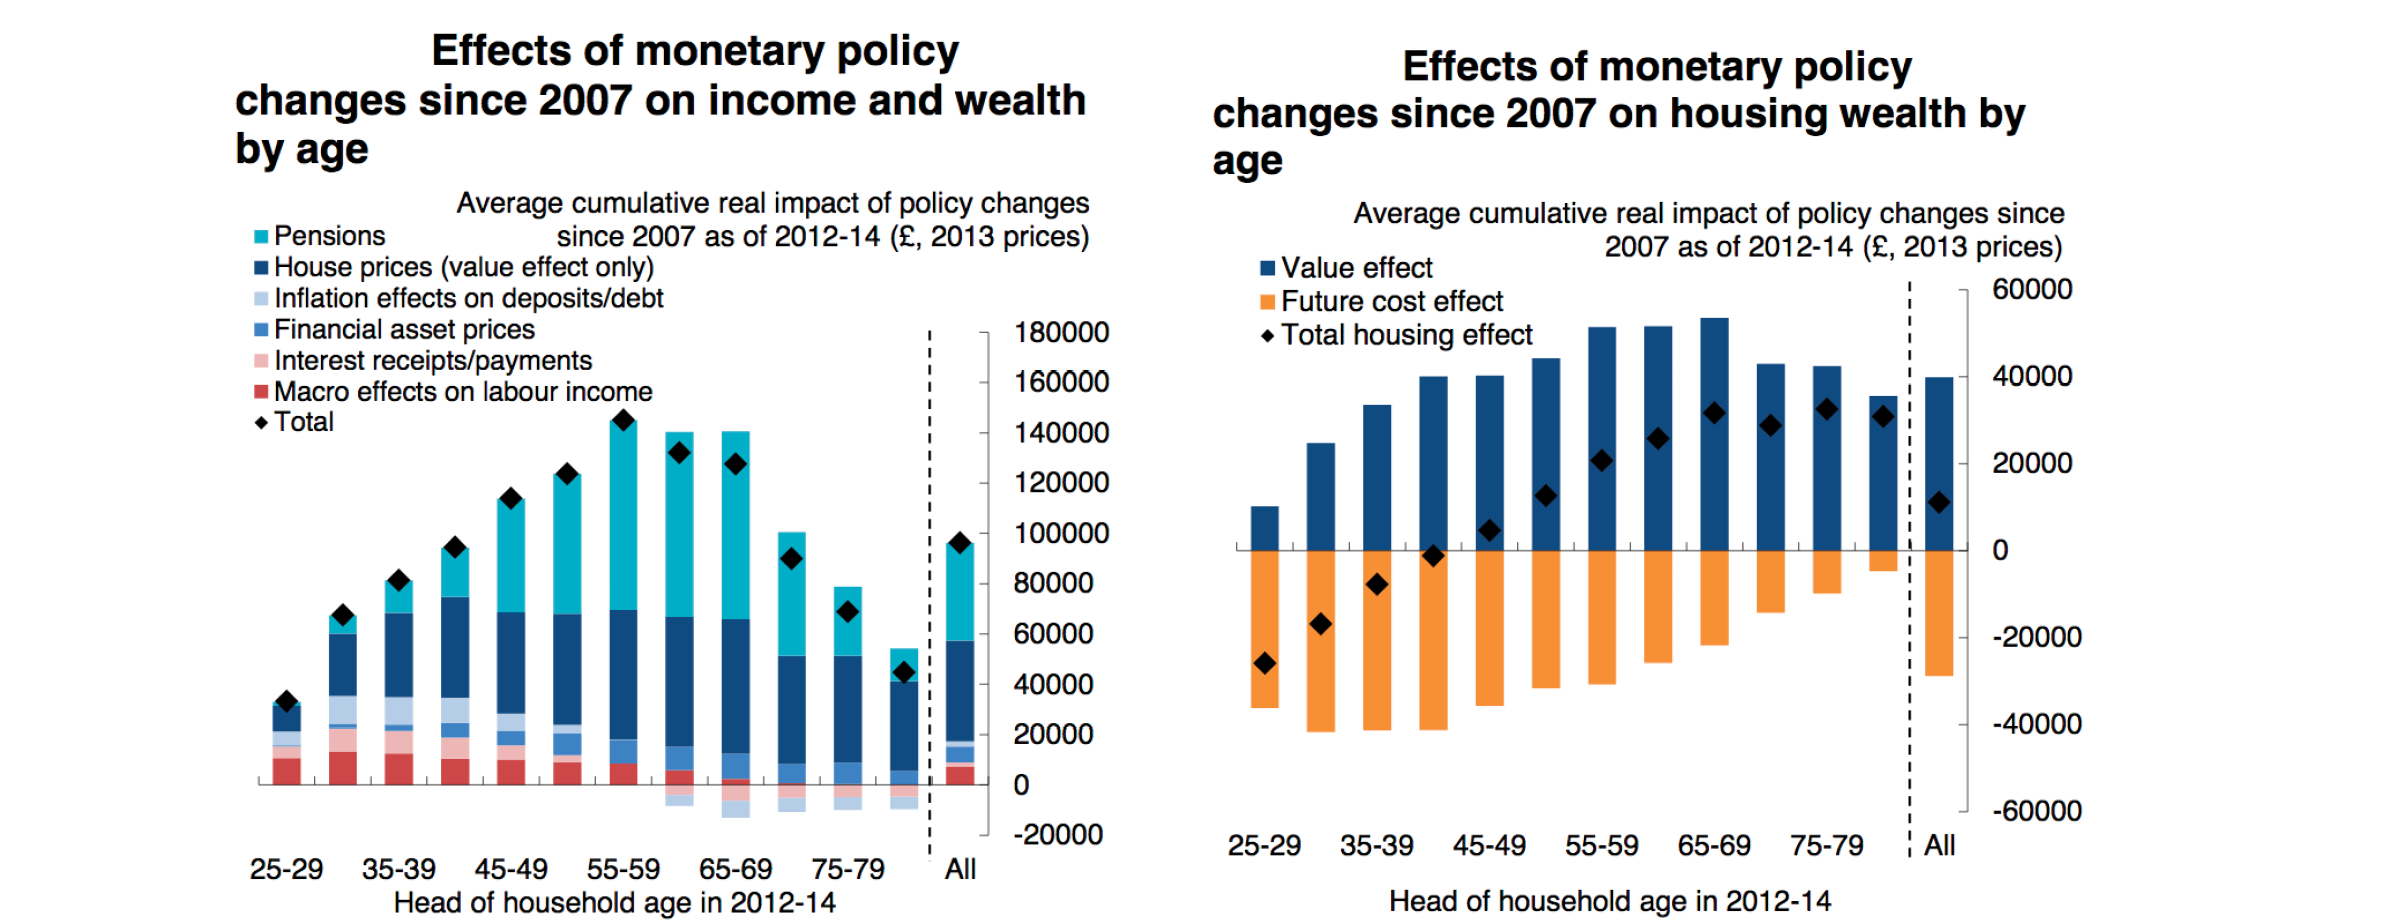 Qe Effect On Wealth By Age, U.K. (Qe Money Infinity And Beyond)